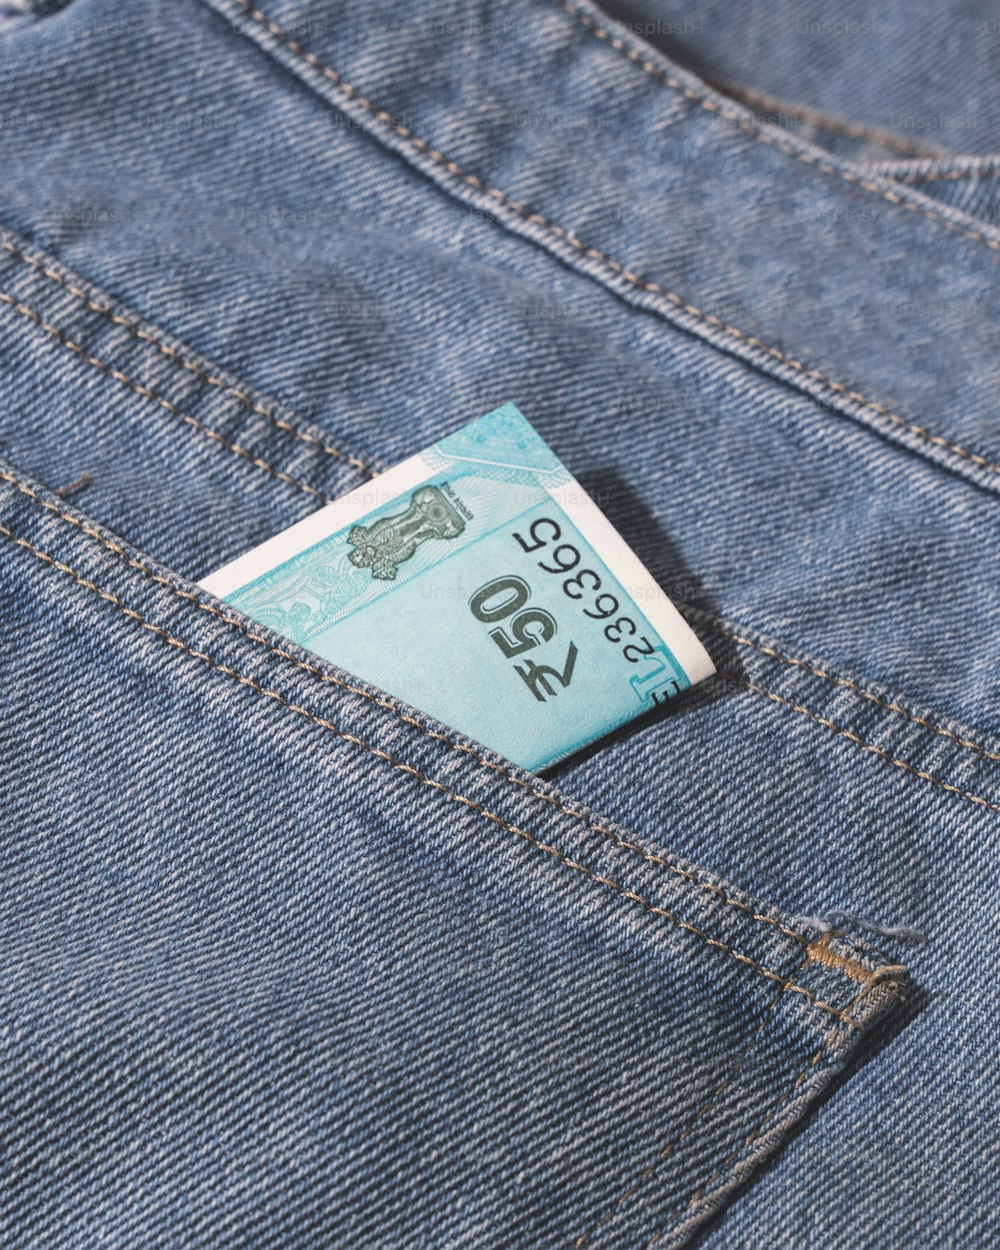 a ten dollar bill sticking out of the back pocket of a pair of jeans